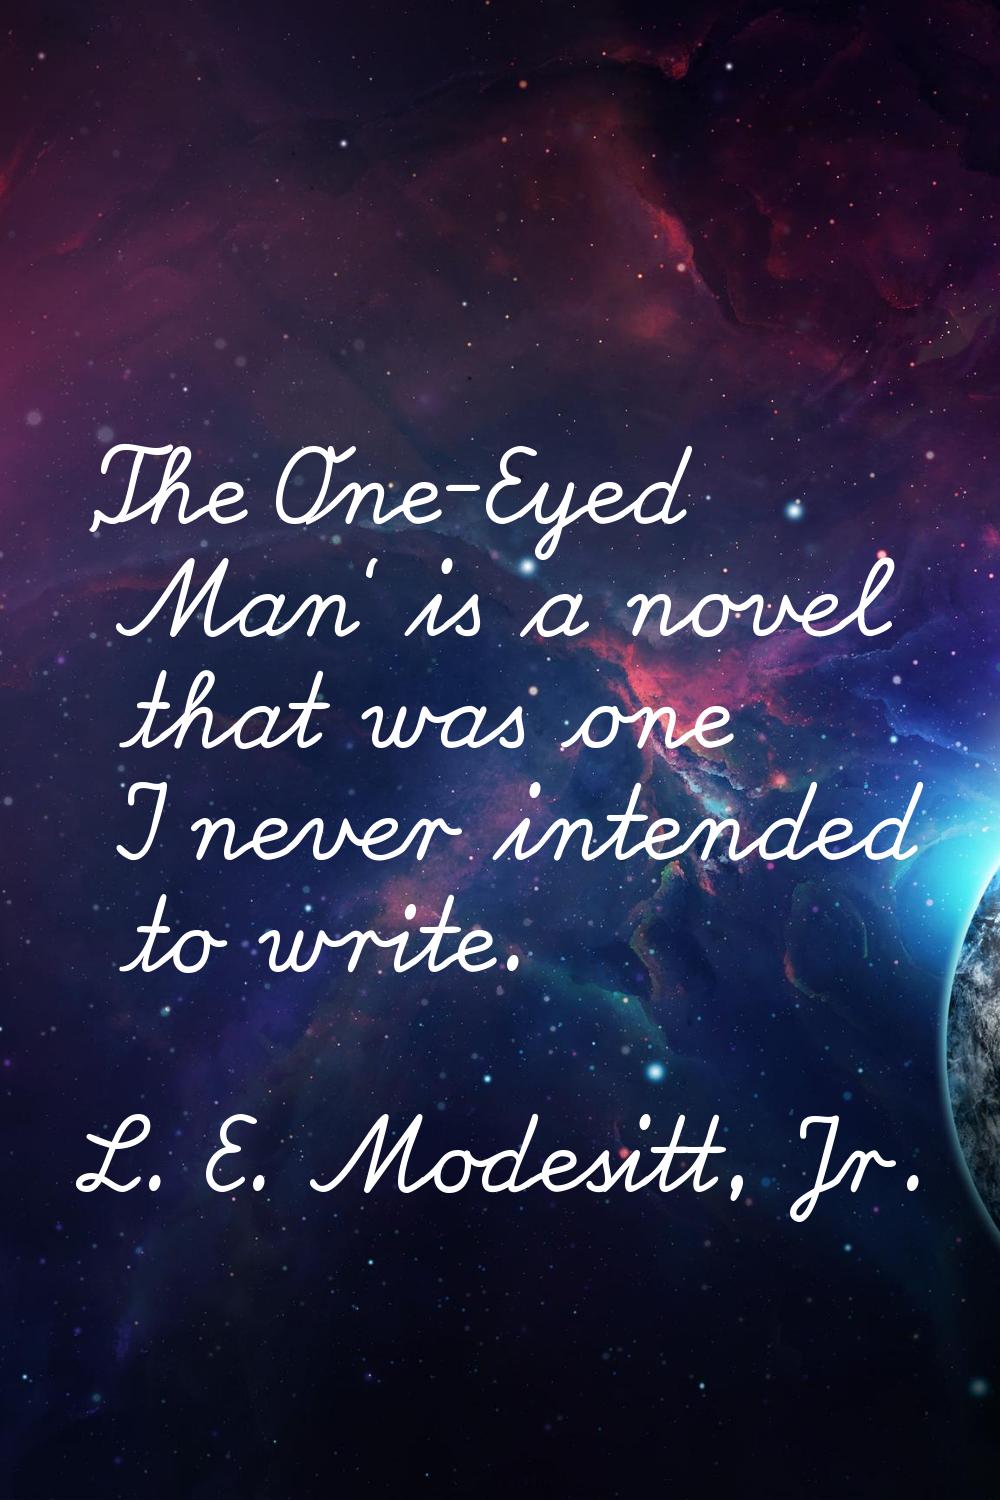 'The One-Eyed Man' is a novel that was one I never intended to write.